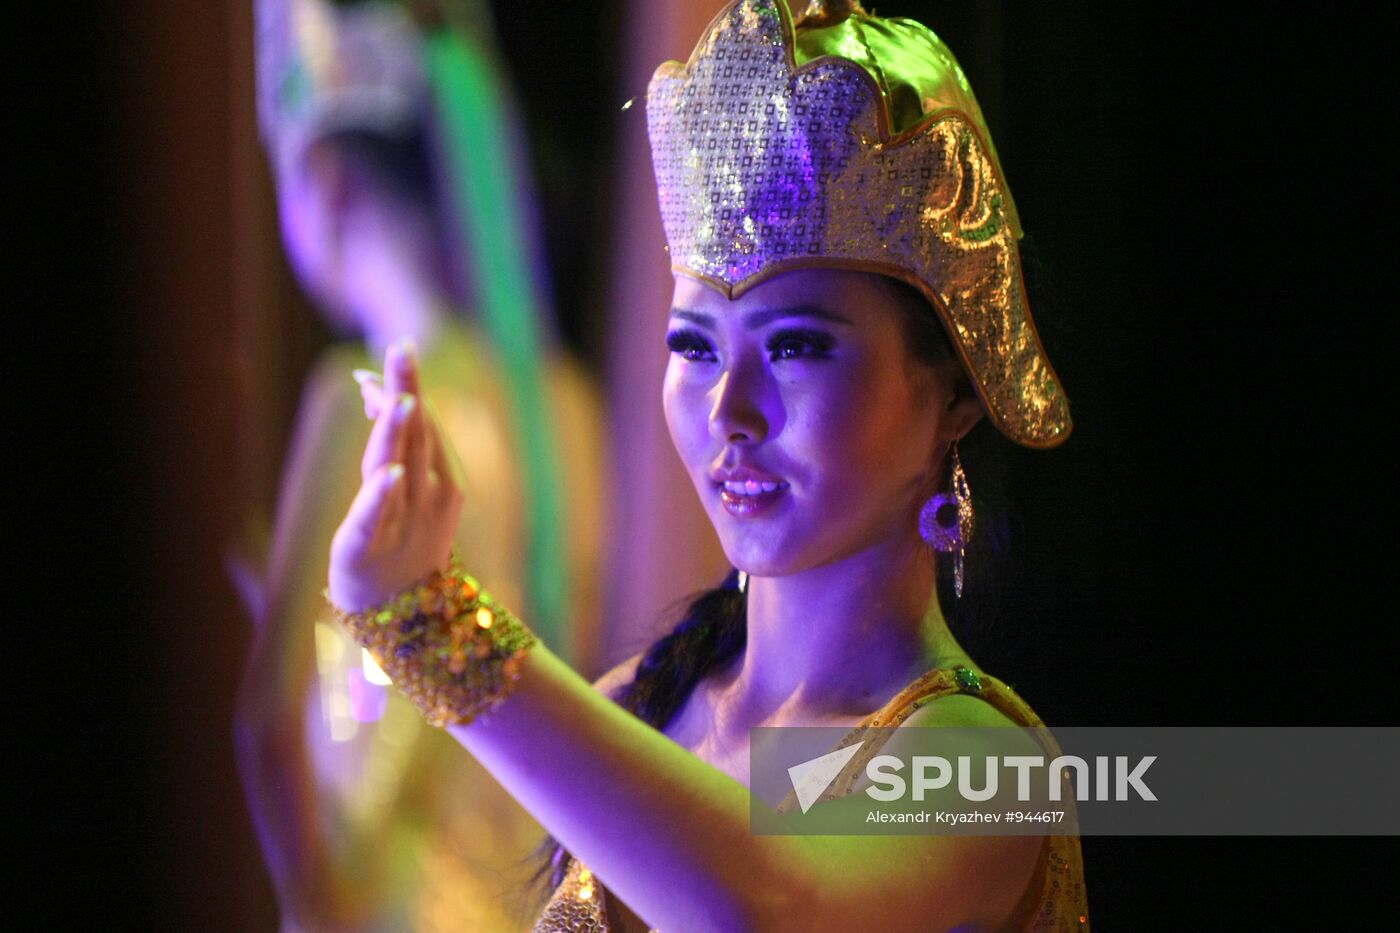 Dangyna-2011 beauty competition